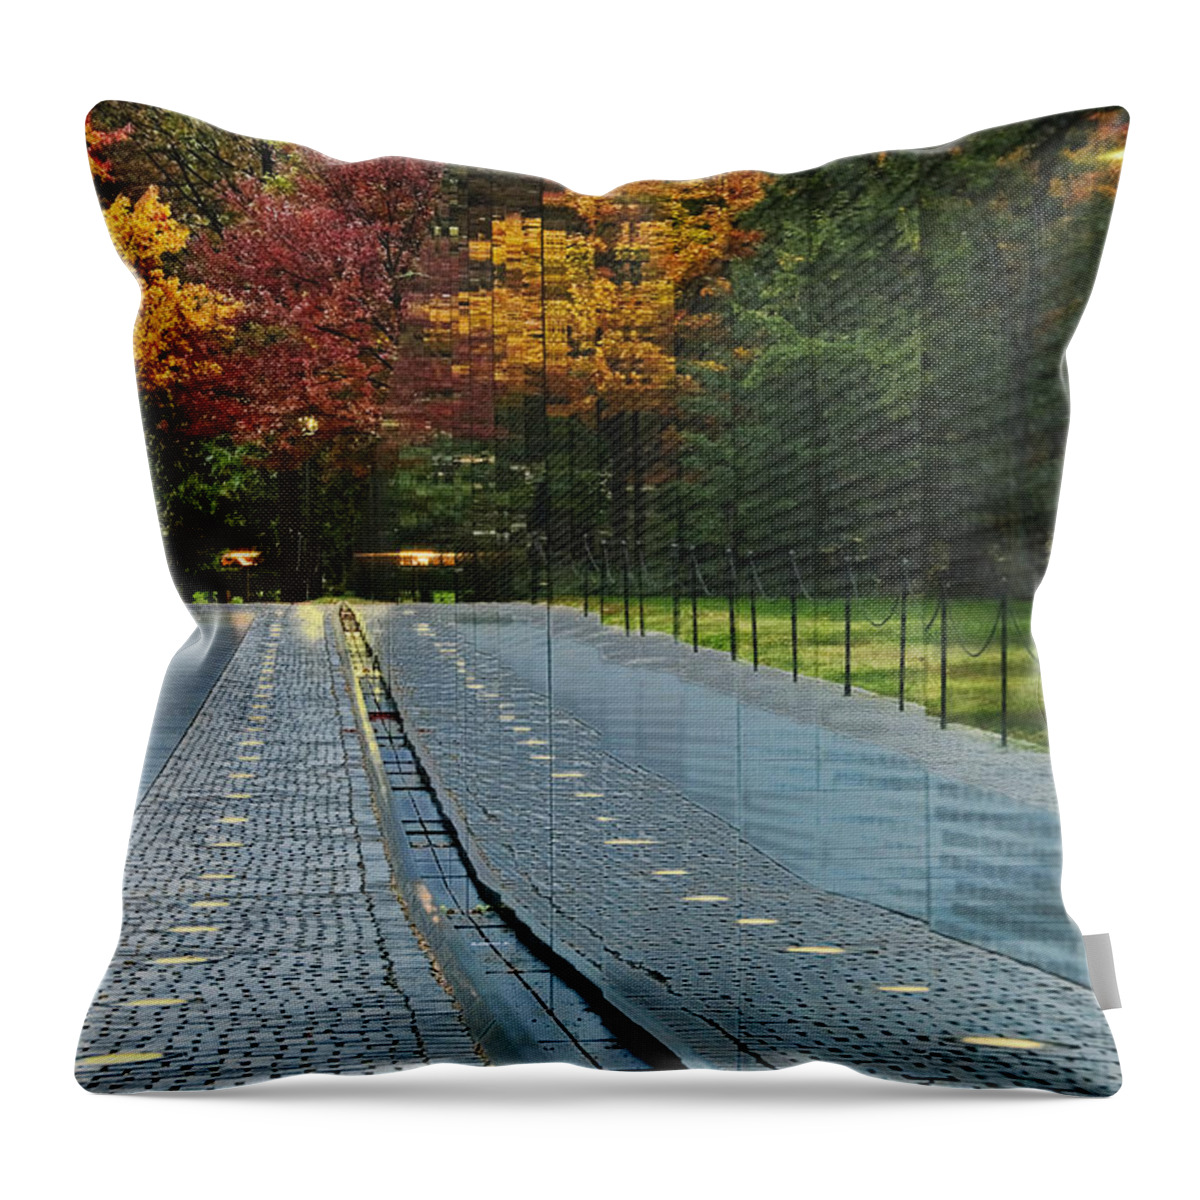 Vietnam Memorial Wall Throw Pillow featuring the photograph Remembrance by Dan McGeorge